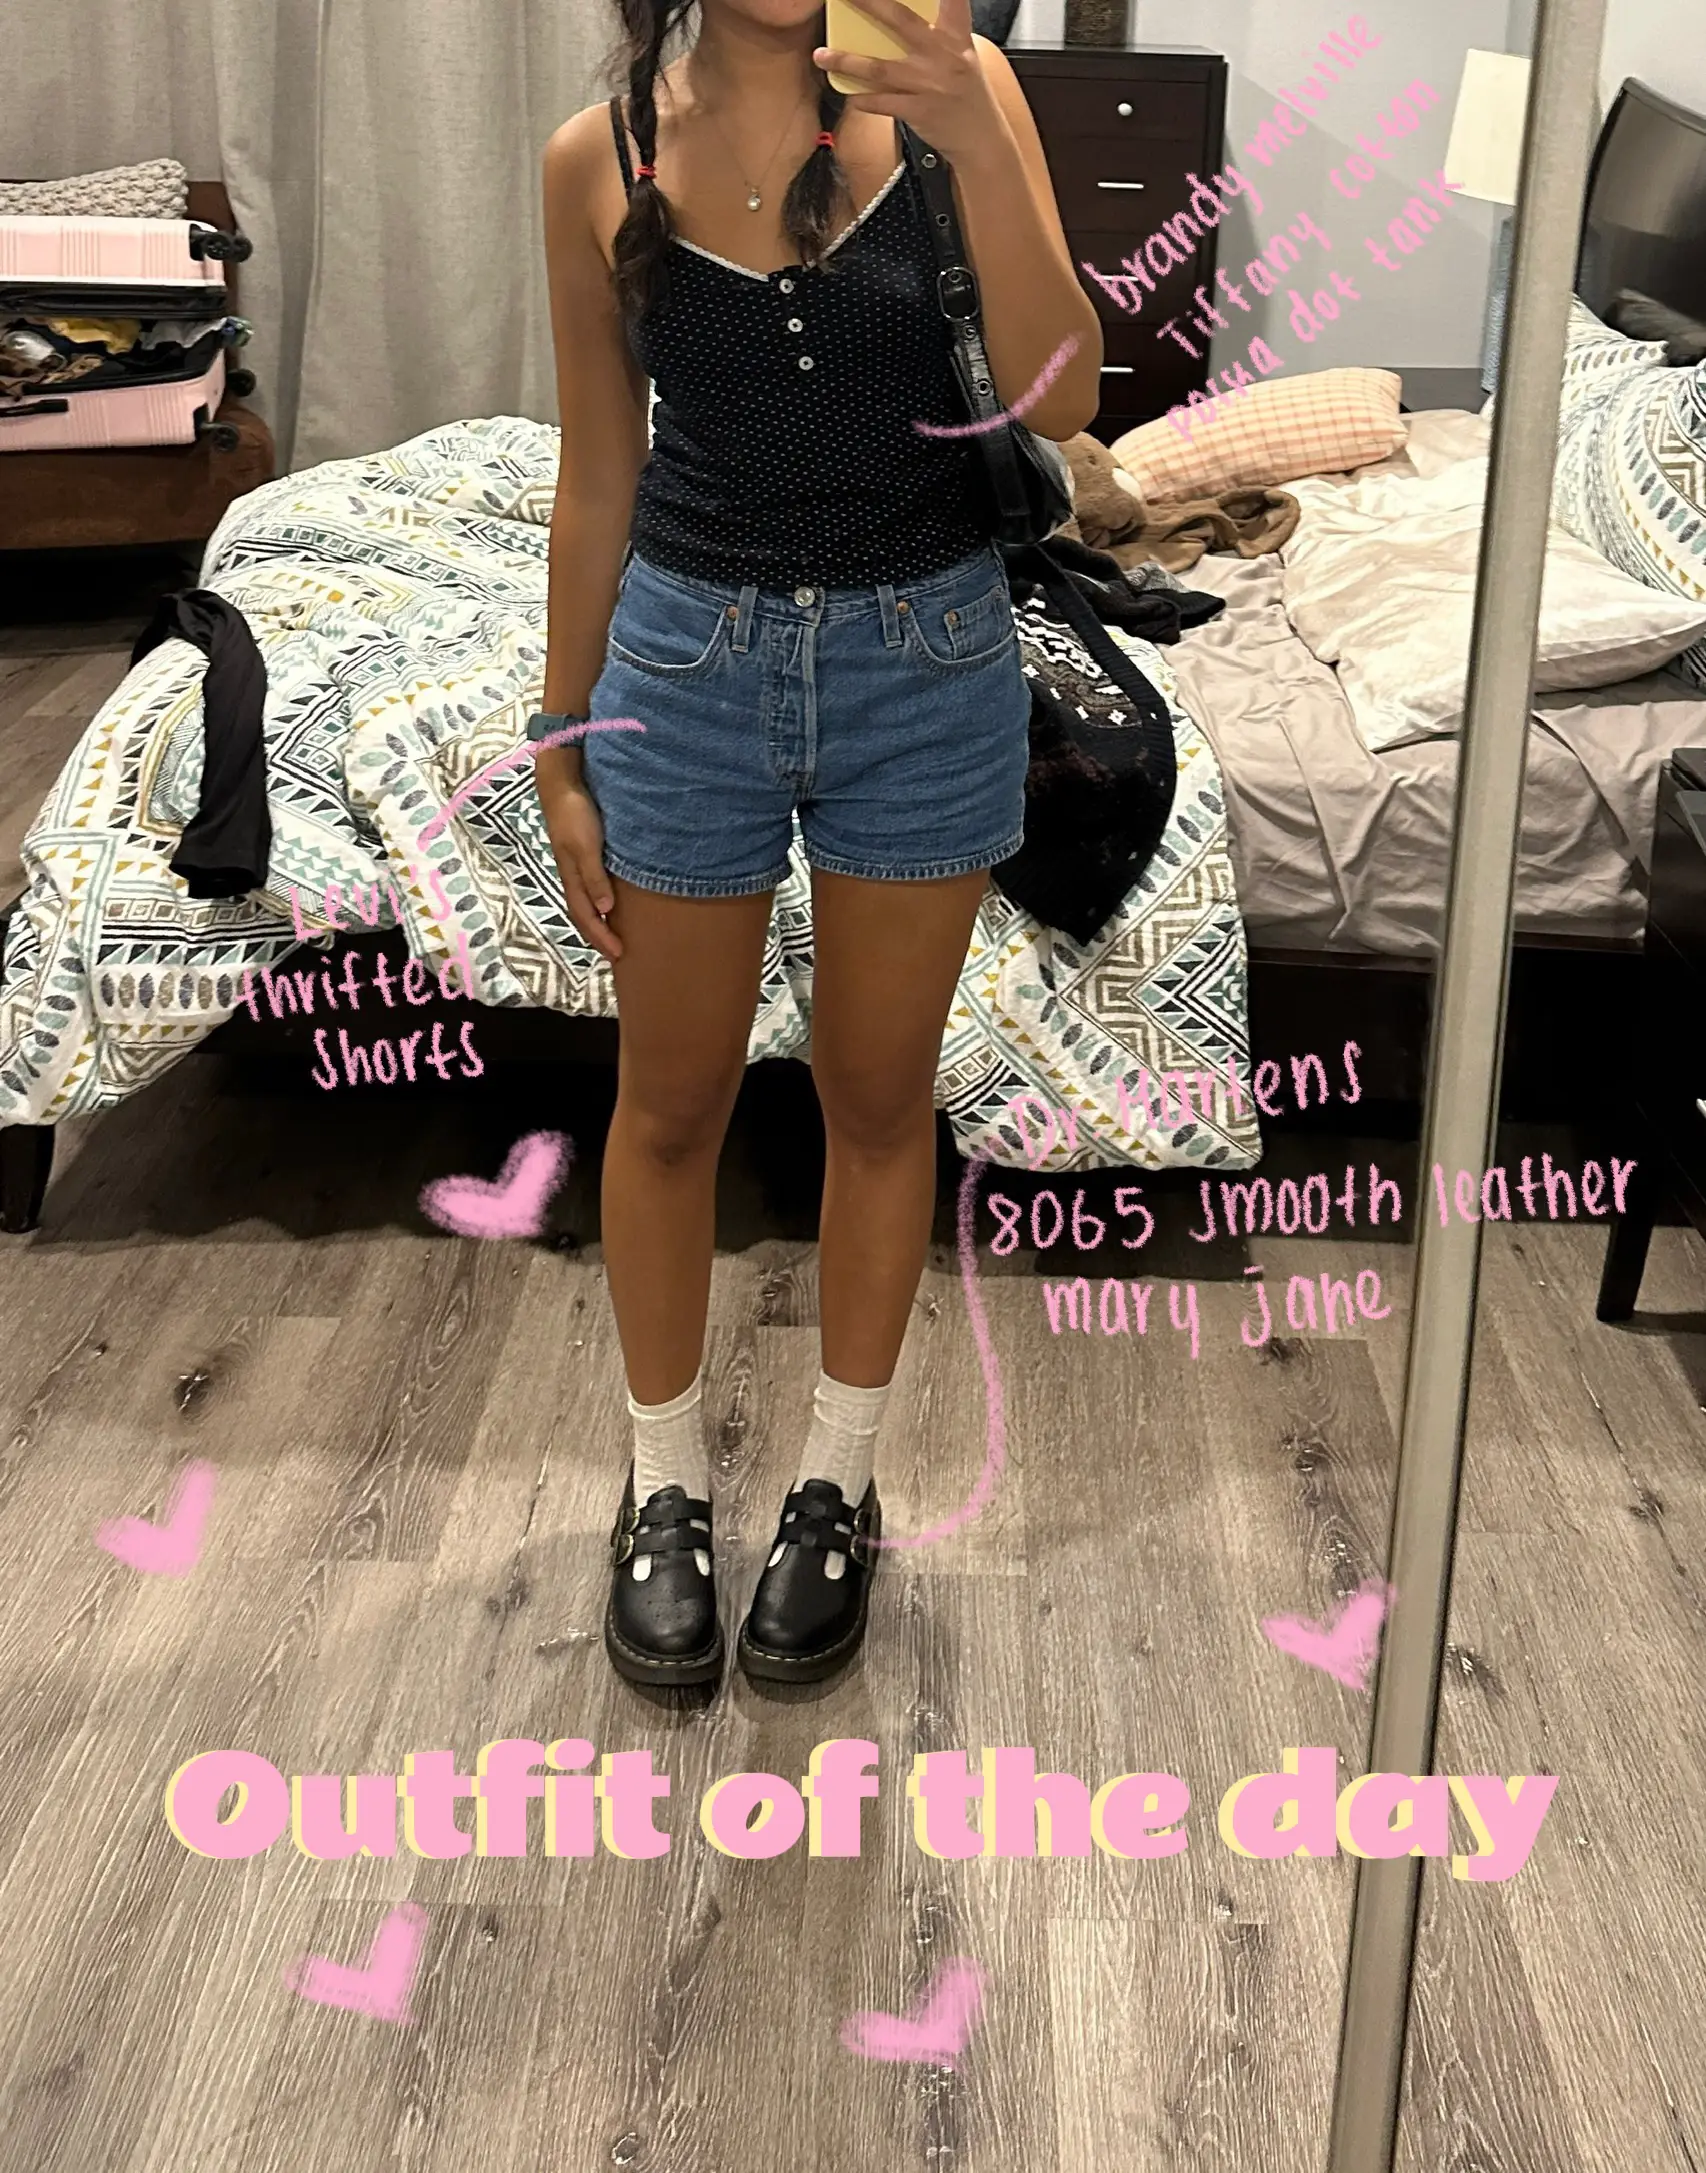 Tiffany Tank Brandy Melville  Casual outfits, Cute outfits